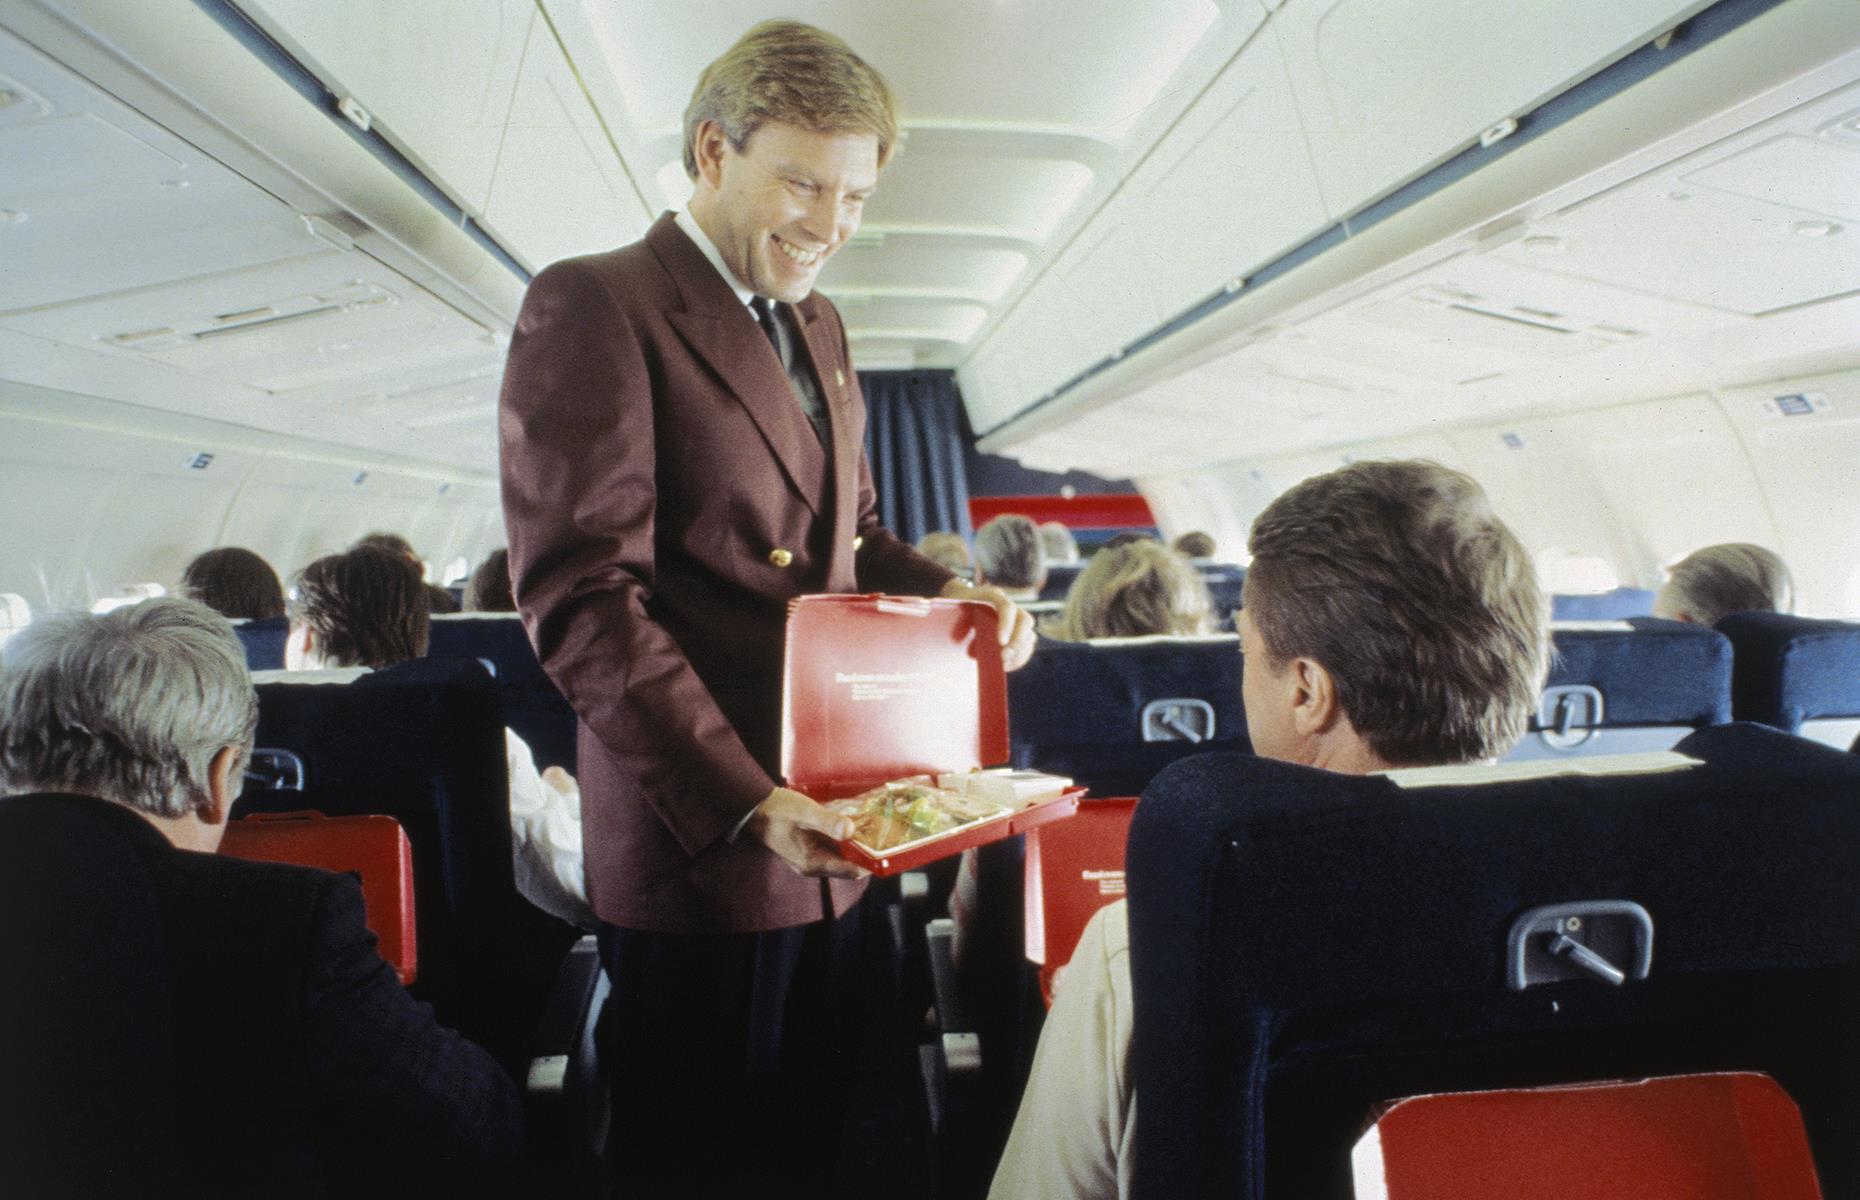 Through this decade, as flying became more and more commonplace, the economy class cabin looked much as it does today. Lavish, multi-course meals had been mostly replaced with more humble dinners served from boxes or trays. This photo shows a SAS flight attendant serving boxed meals to passengers.